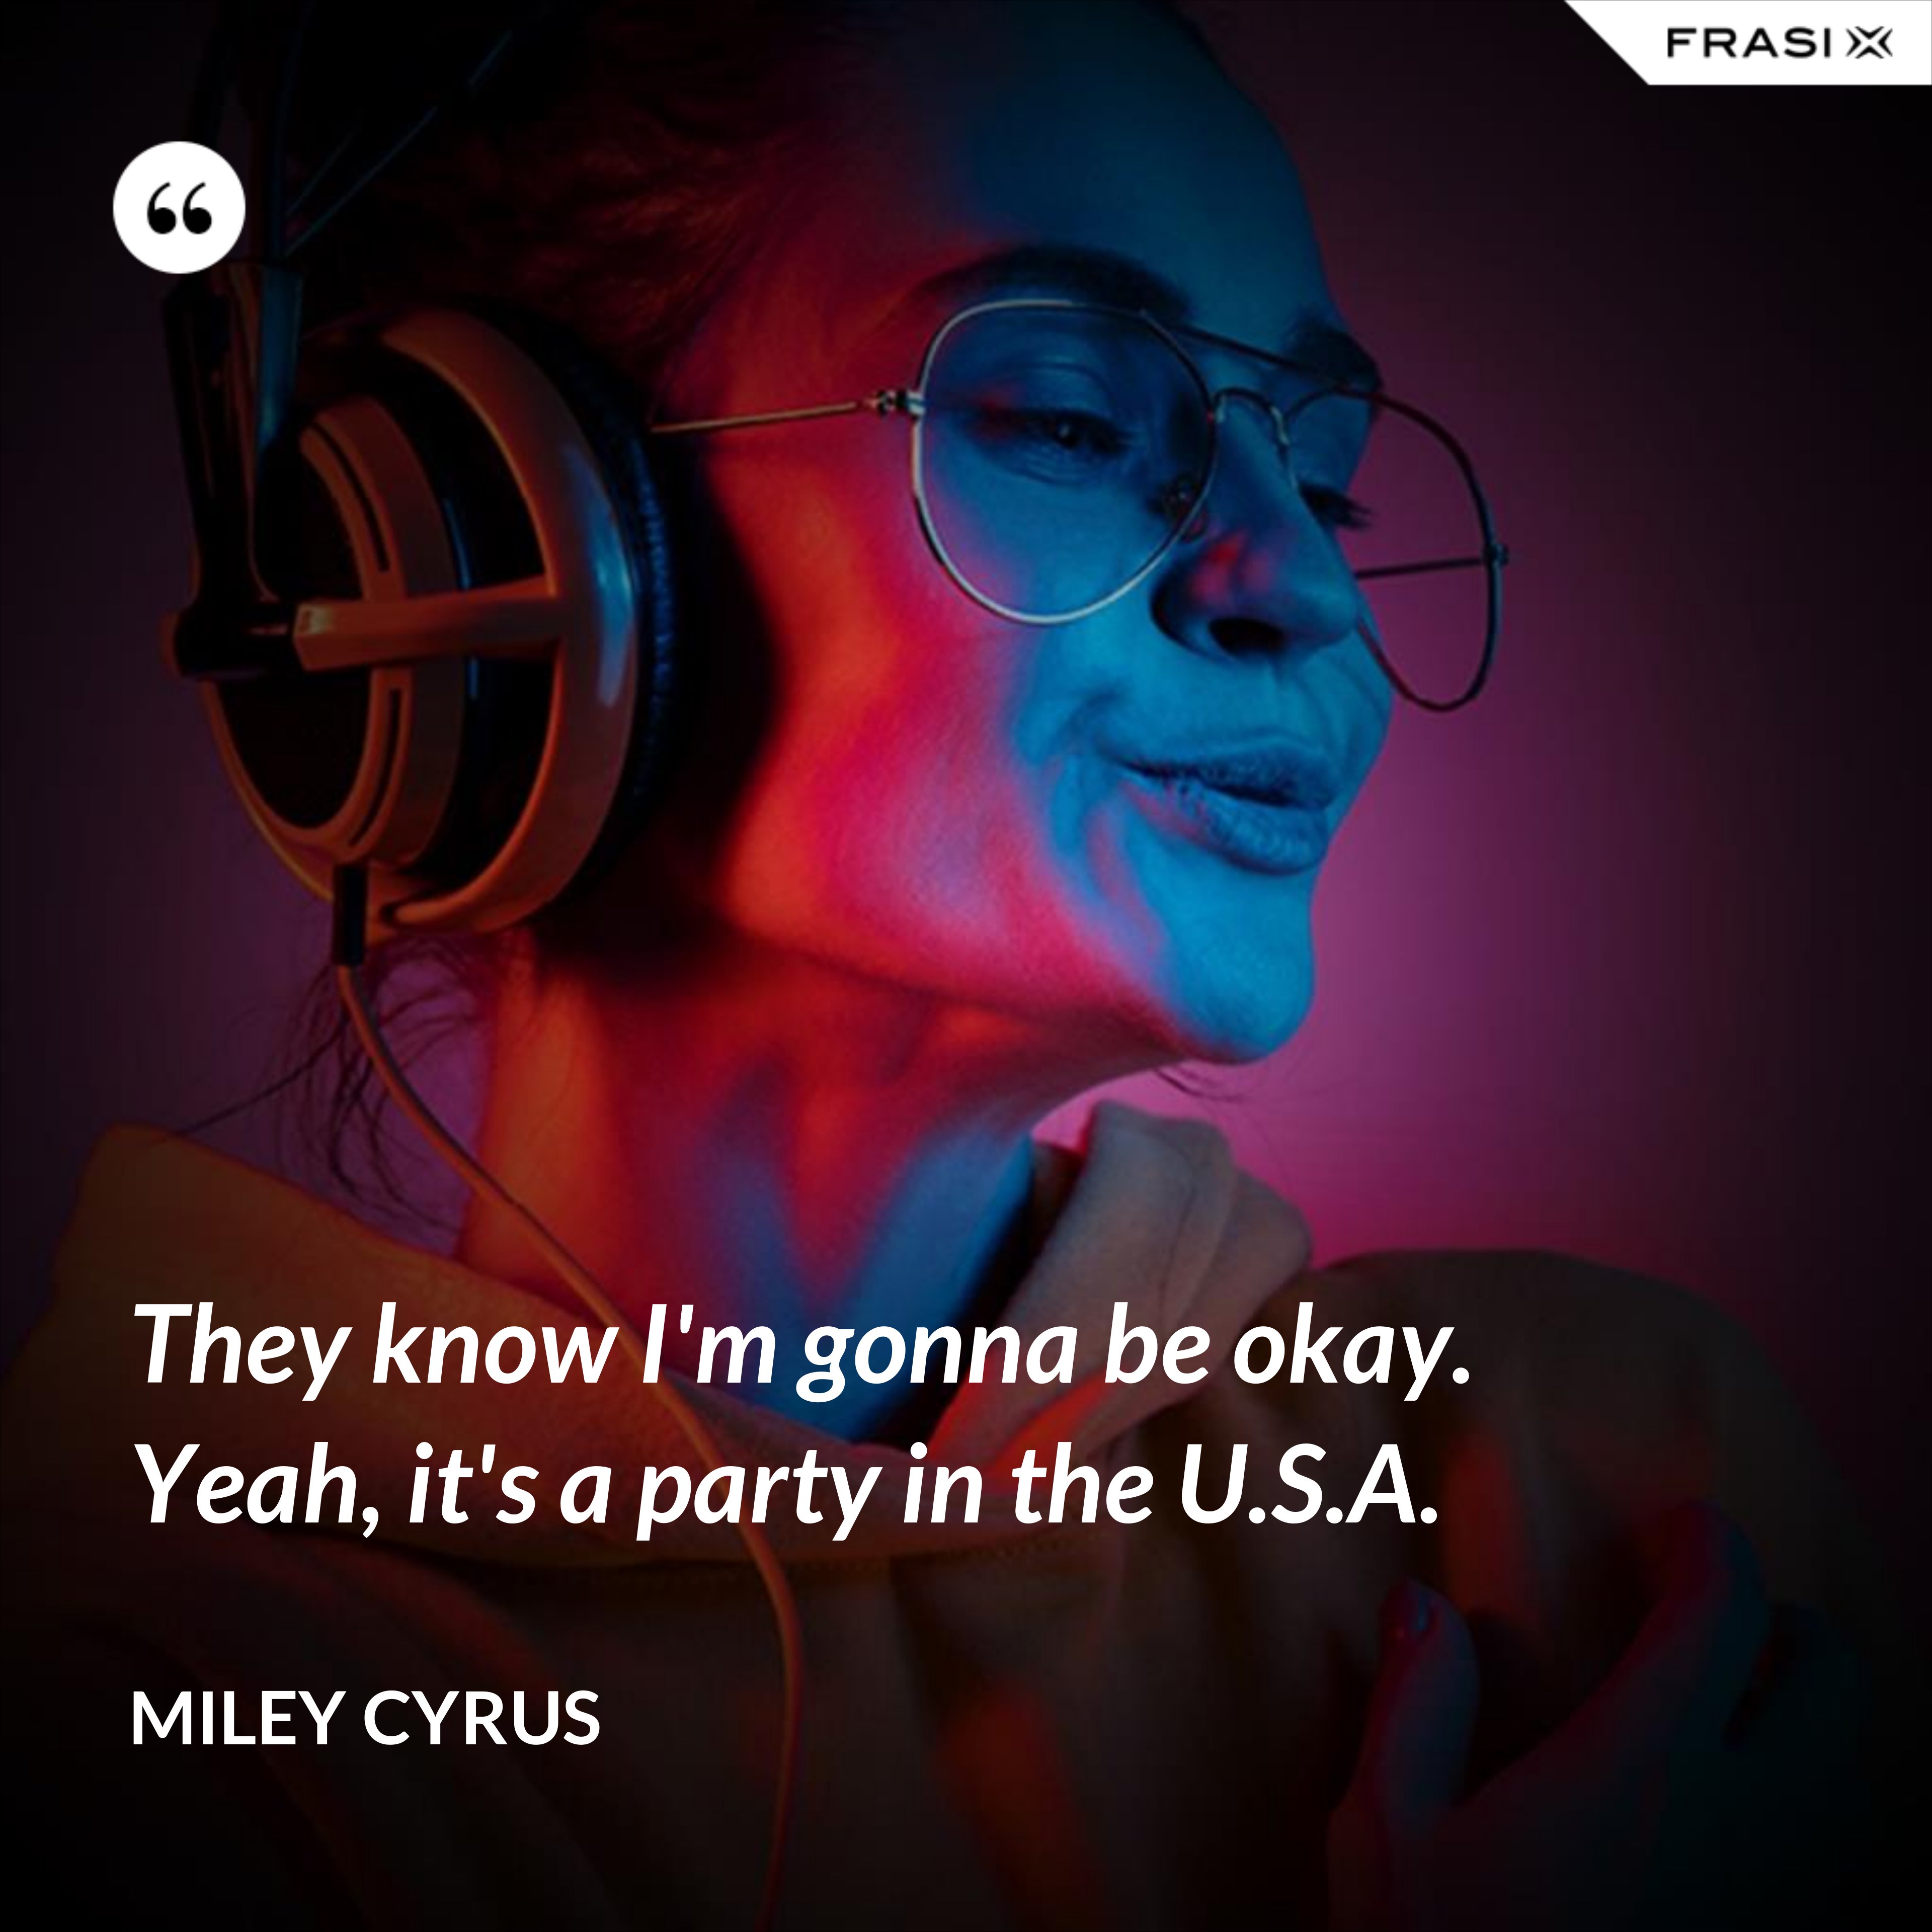 They know I'm gonna be okay. Yeah, it's a party in the U.S.A. - Miley Cyrus